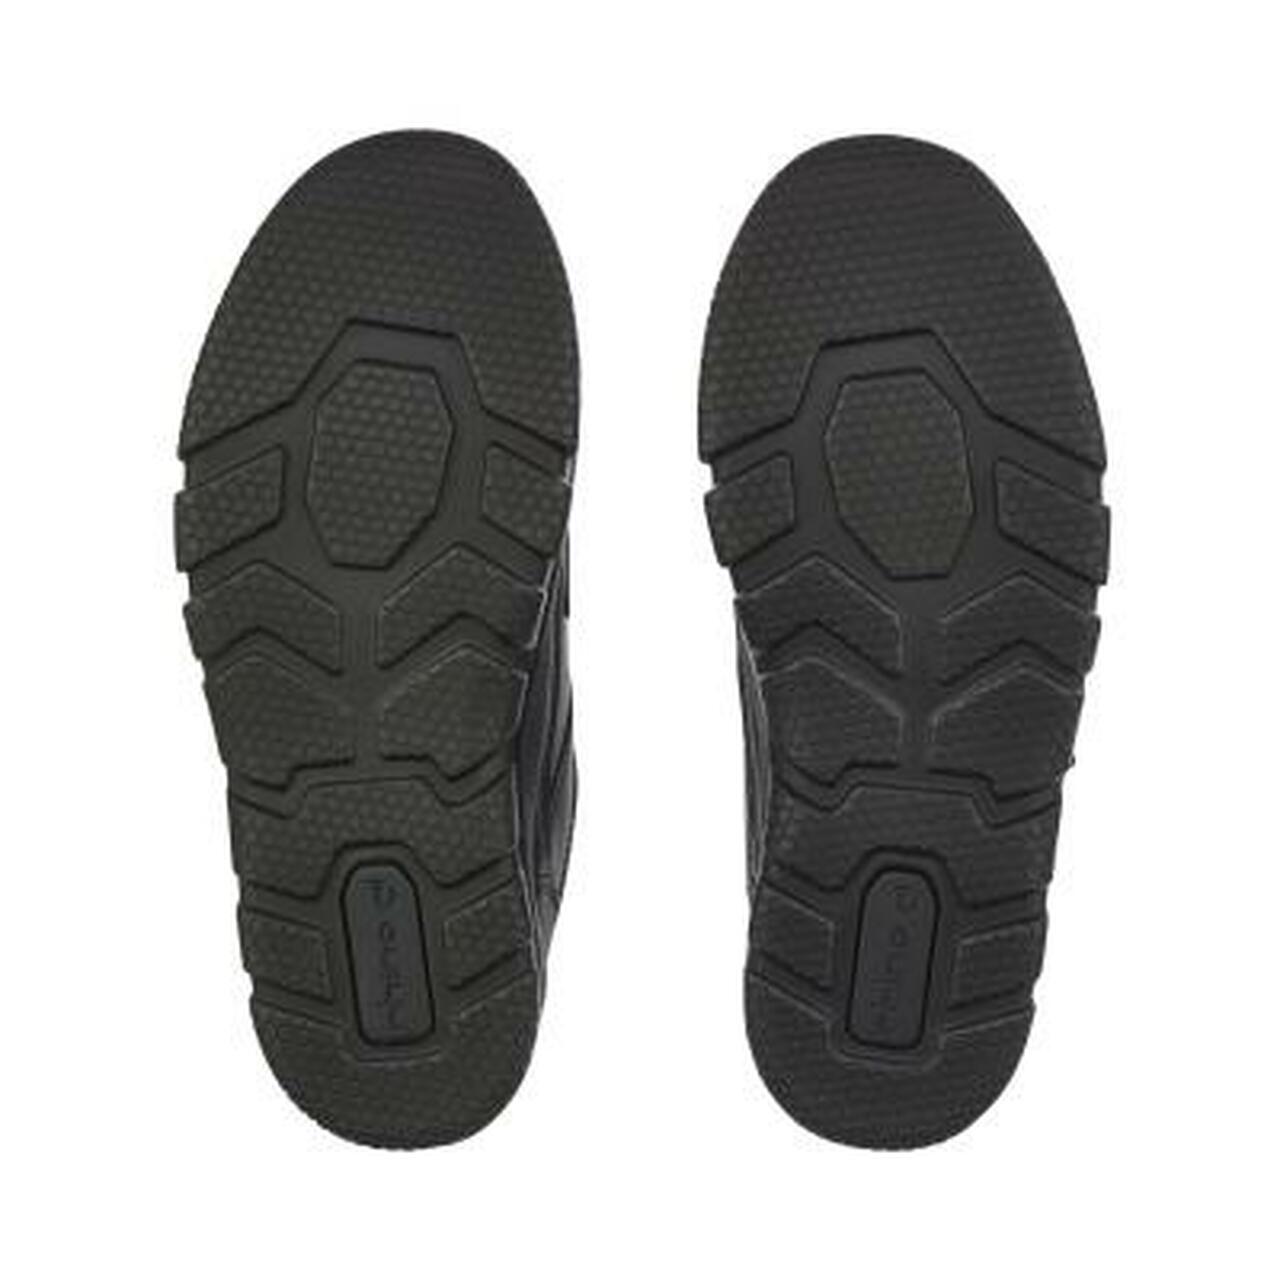 A pair of boys school shoes by Start Rite, style Warrior, in black leather with double velcro fastening. Sole view.